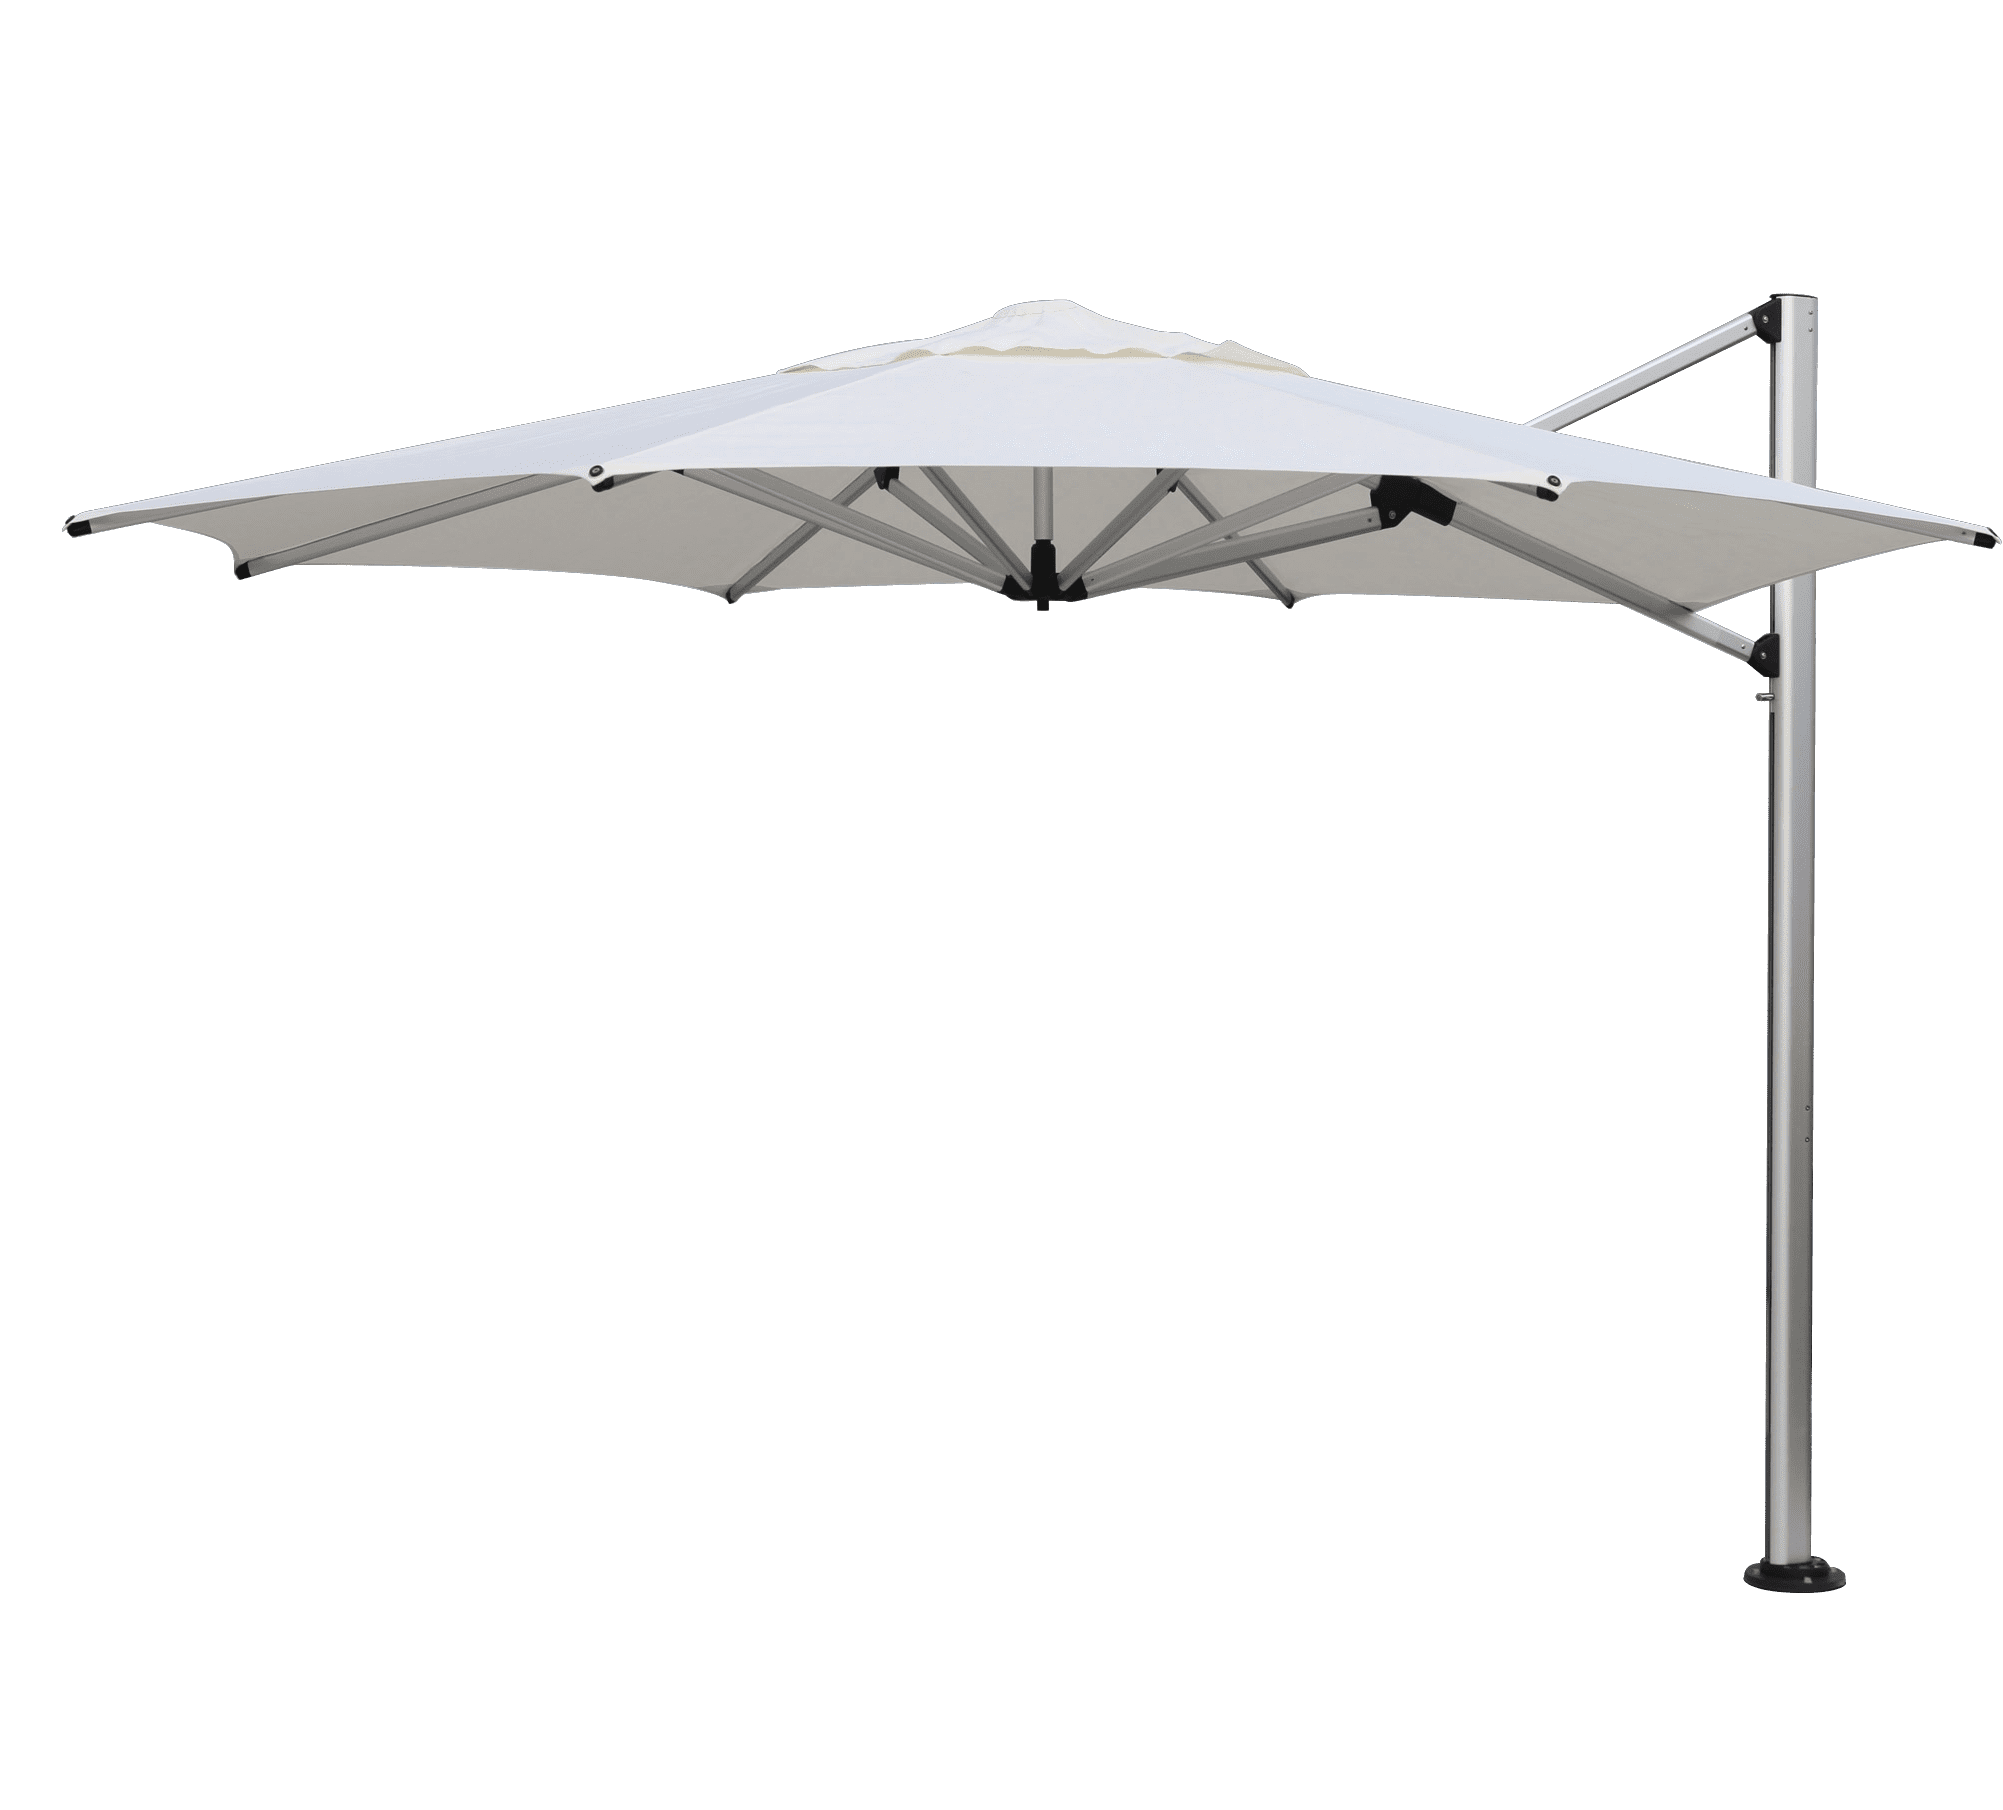 Image of shadowspec tilting offset umbrella (SU4) with clear background